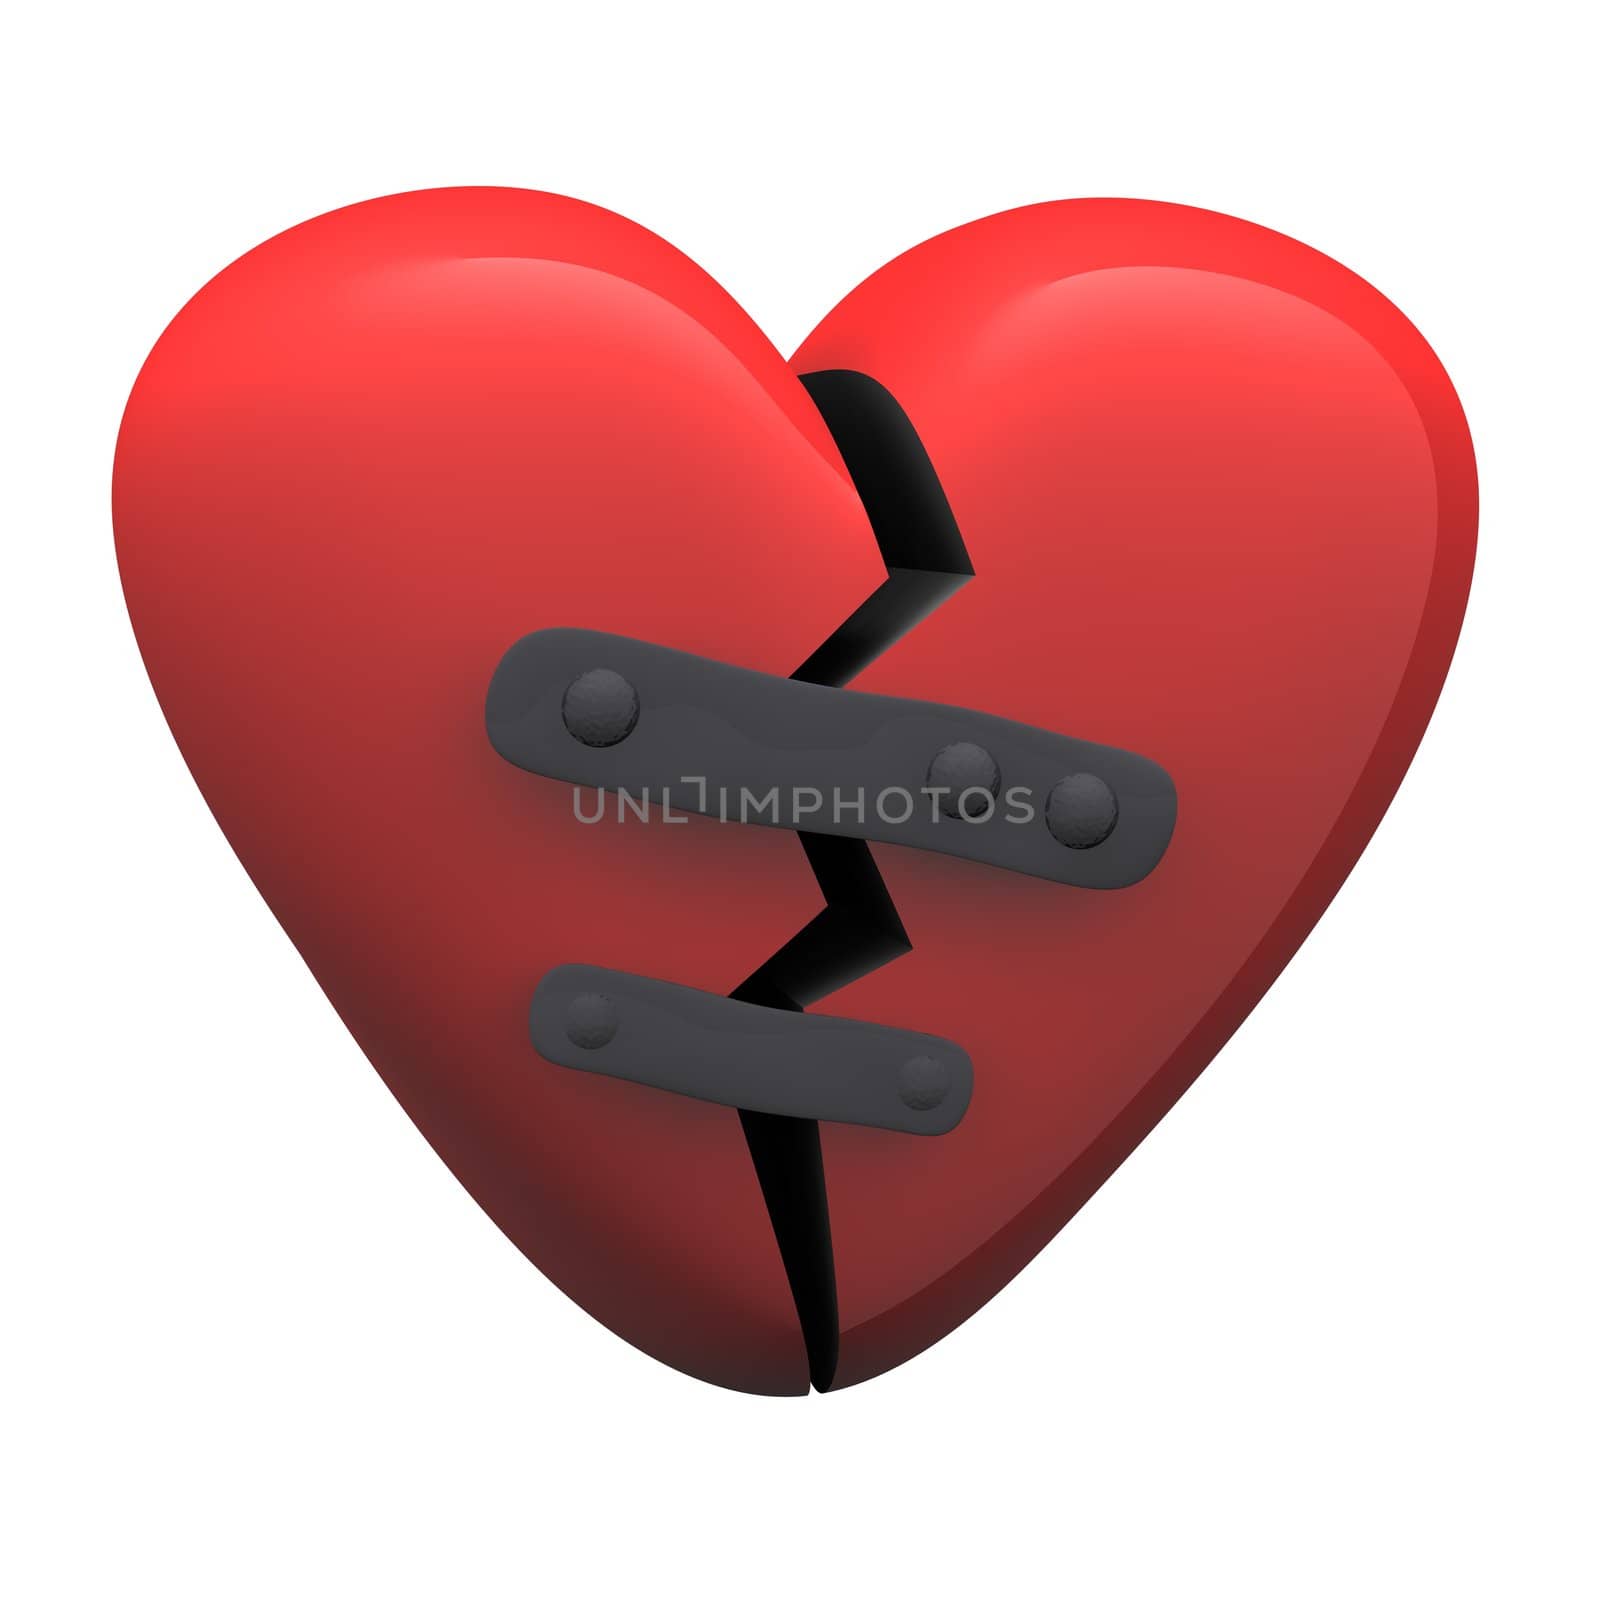 Red glossy patched heart isolated on white. 3d rendered illustration.